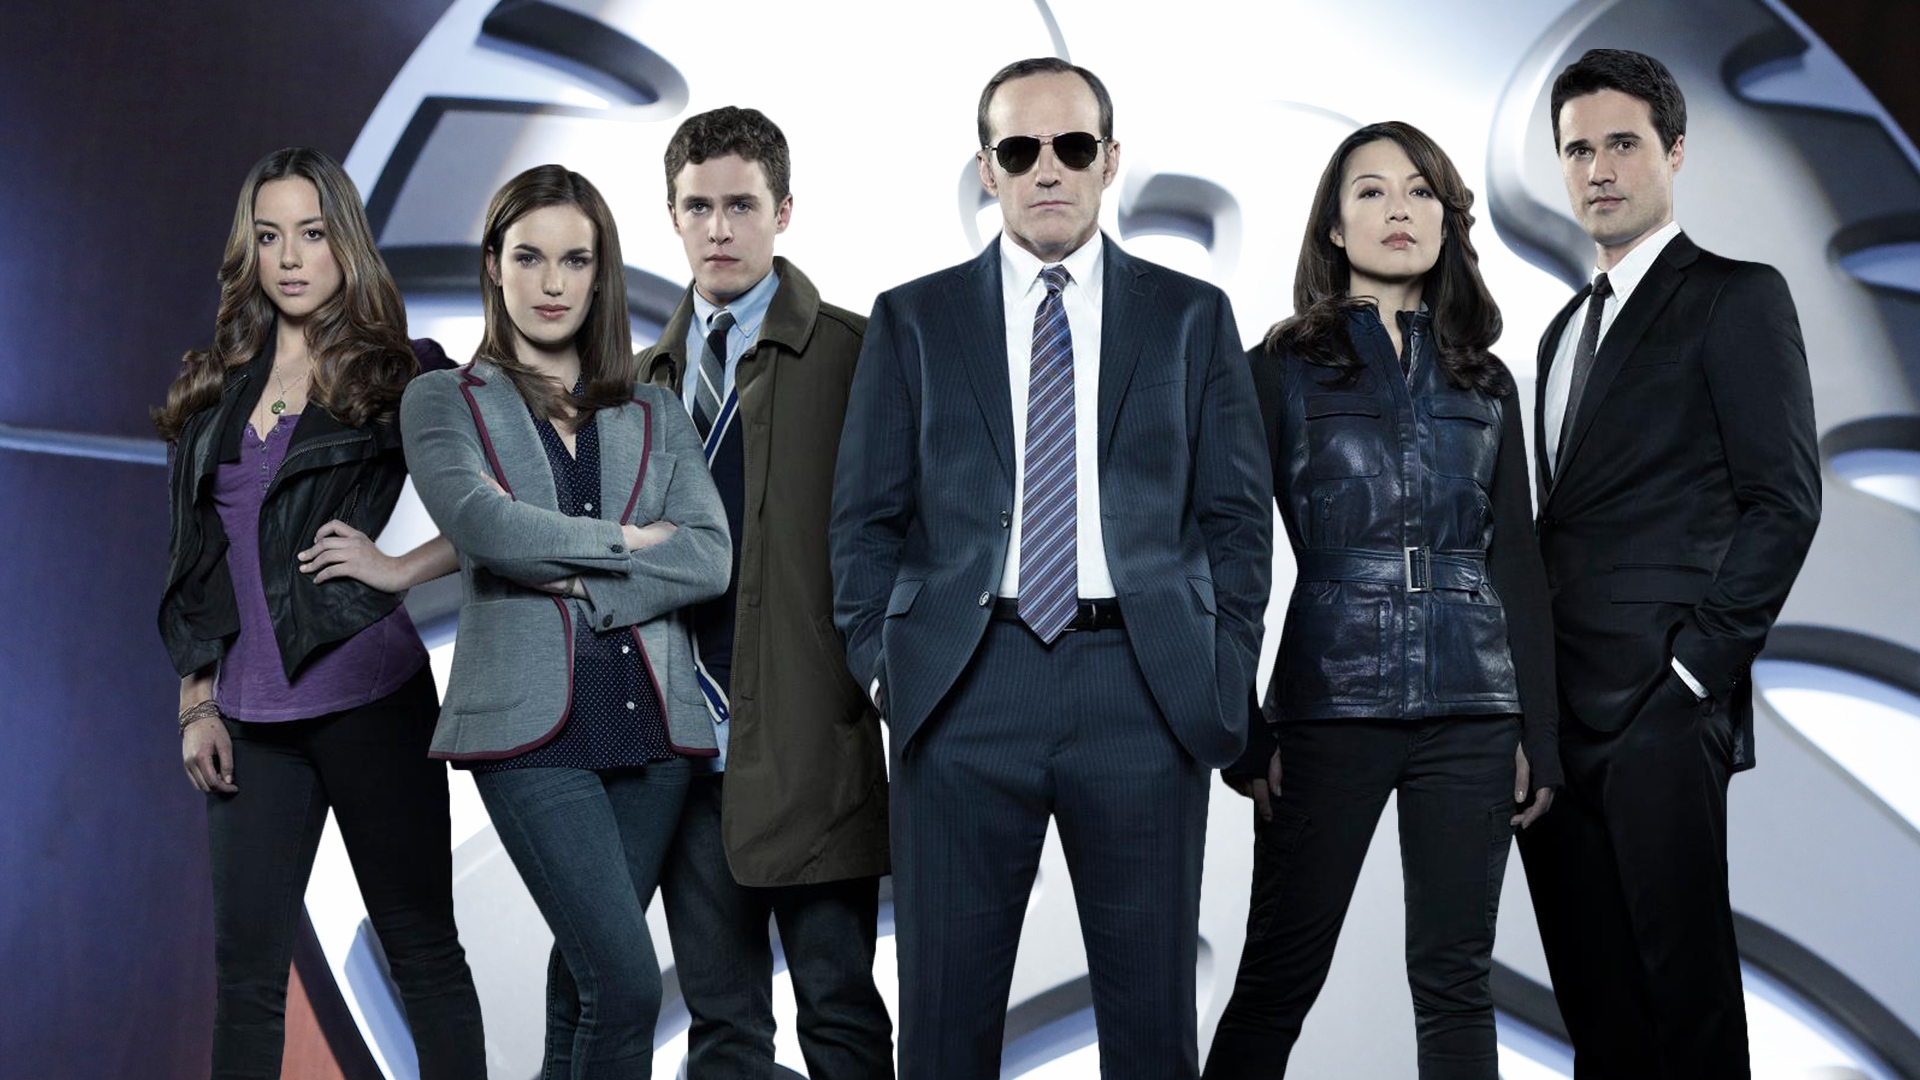 Marvels Agents Of SHIELD s01e15 Free Episode - SnipeTV